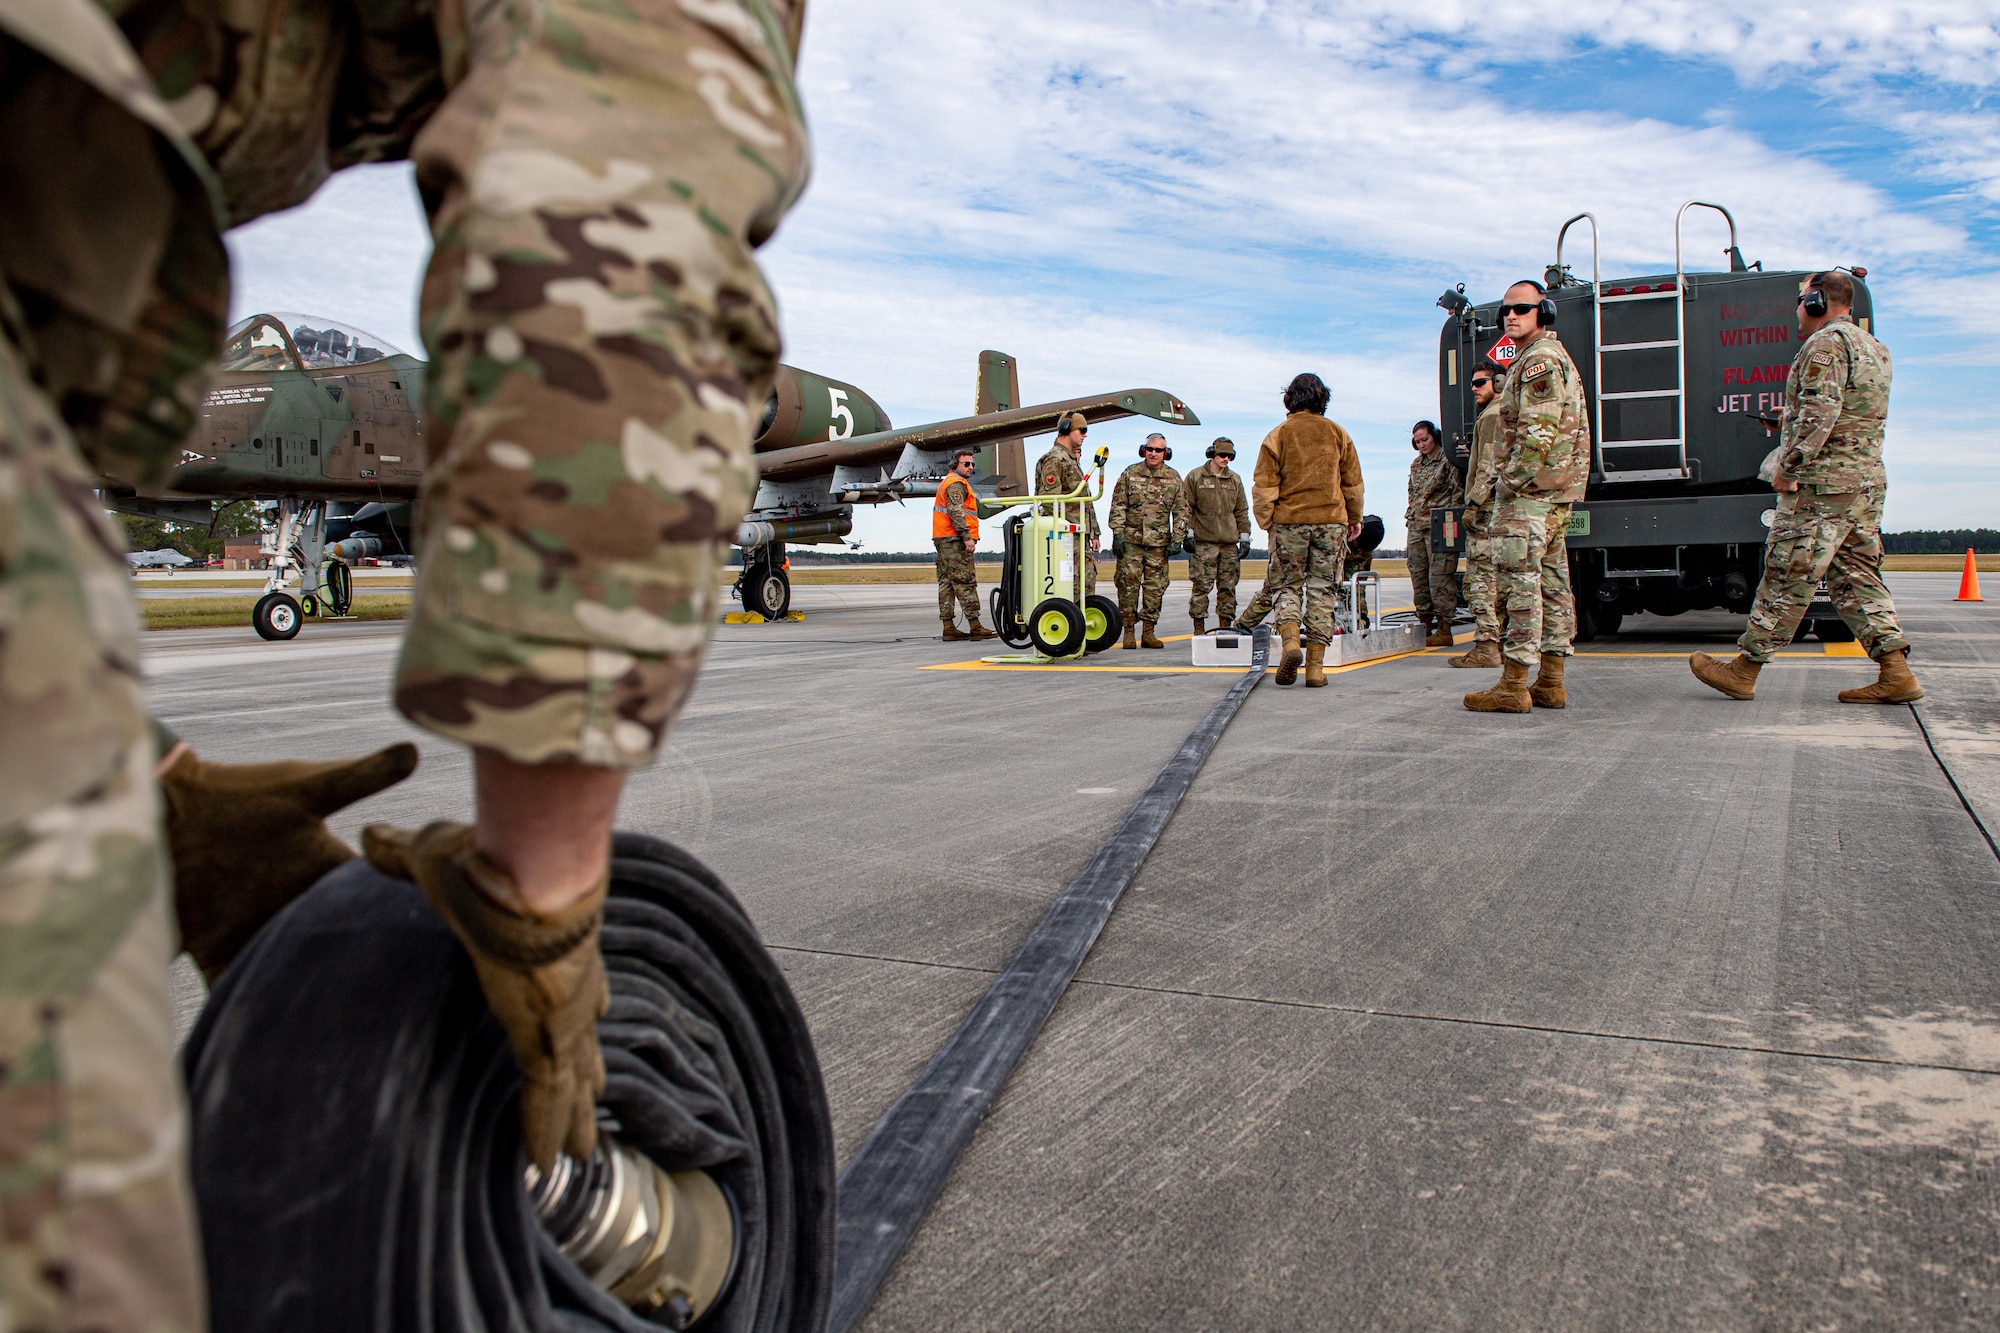 A U.S. Air Force Airman assigned to the 23rd Logistics Readiness Squadron rolls a fuel hose during a special fueling operations familiarization training at Moody Air Force Base, Georgia, Dec. 13, 2023. Over a three-day period, Airmen trained Vermont Air National Guardsmen on special fuel operations that support Agile Combat Employment (ACE) concepts. (U.S. Air Force photo by Senior Airman Courtney Sebastianelli)